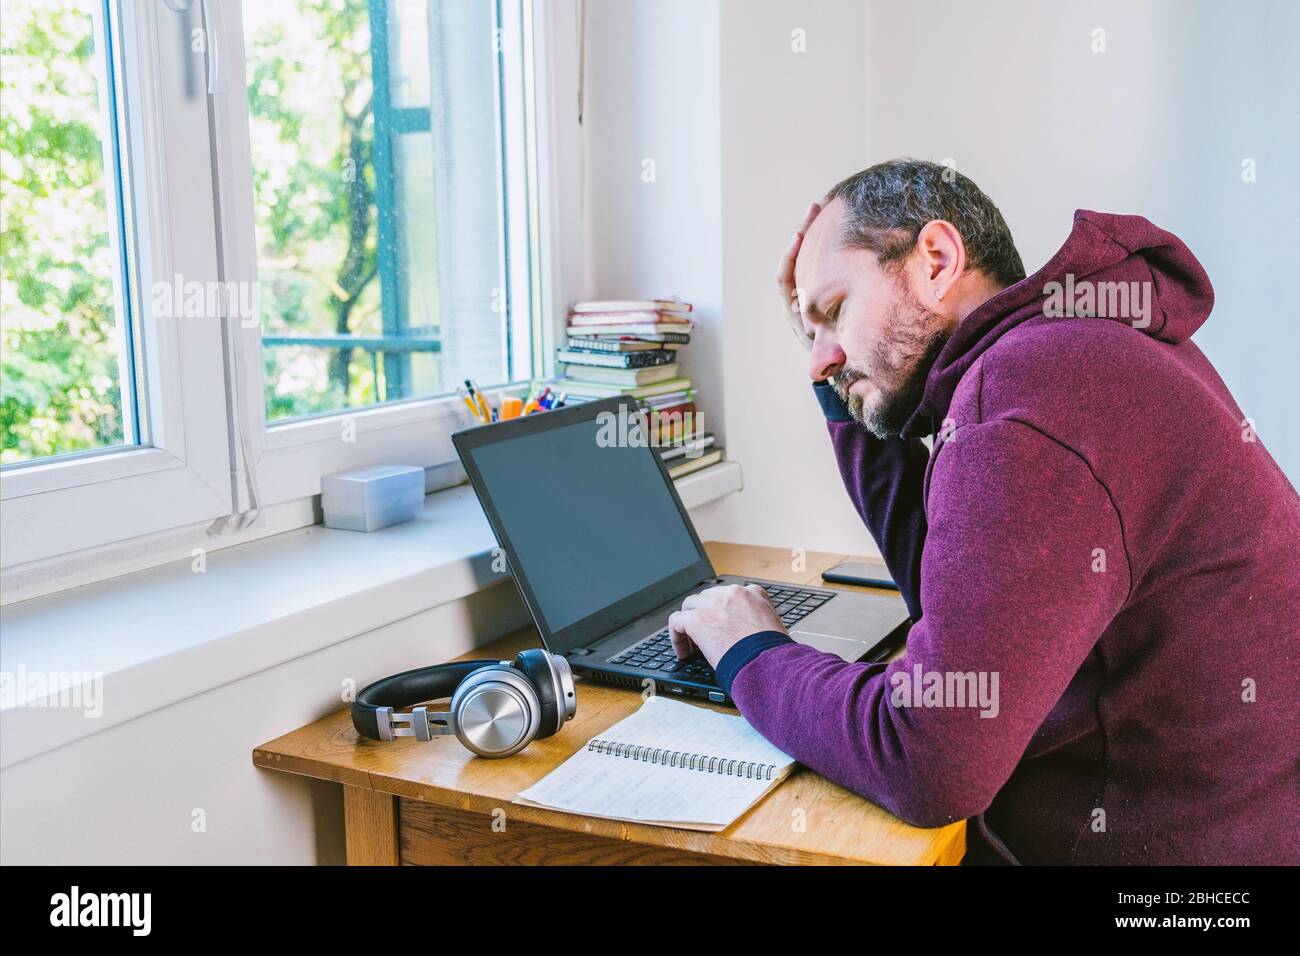 Man working from home office. Adult bearded man concentrated, working online from home on computer laptop behind vintage desk Stock Photo